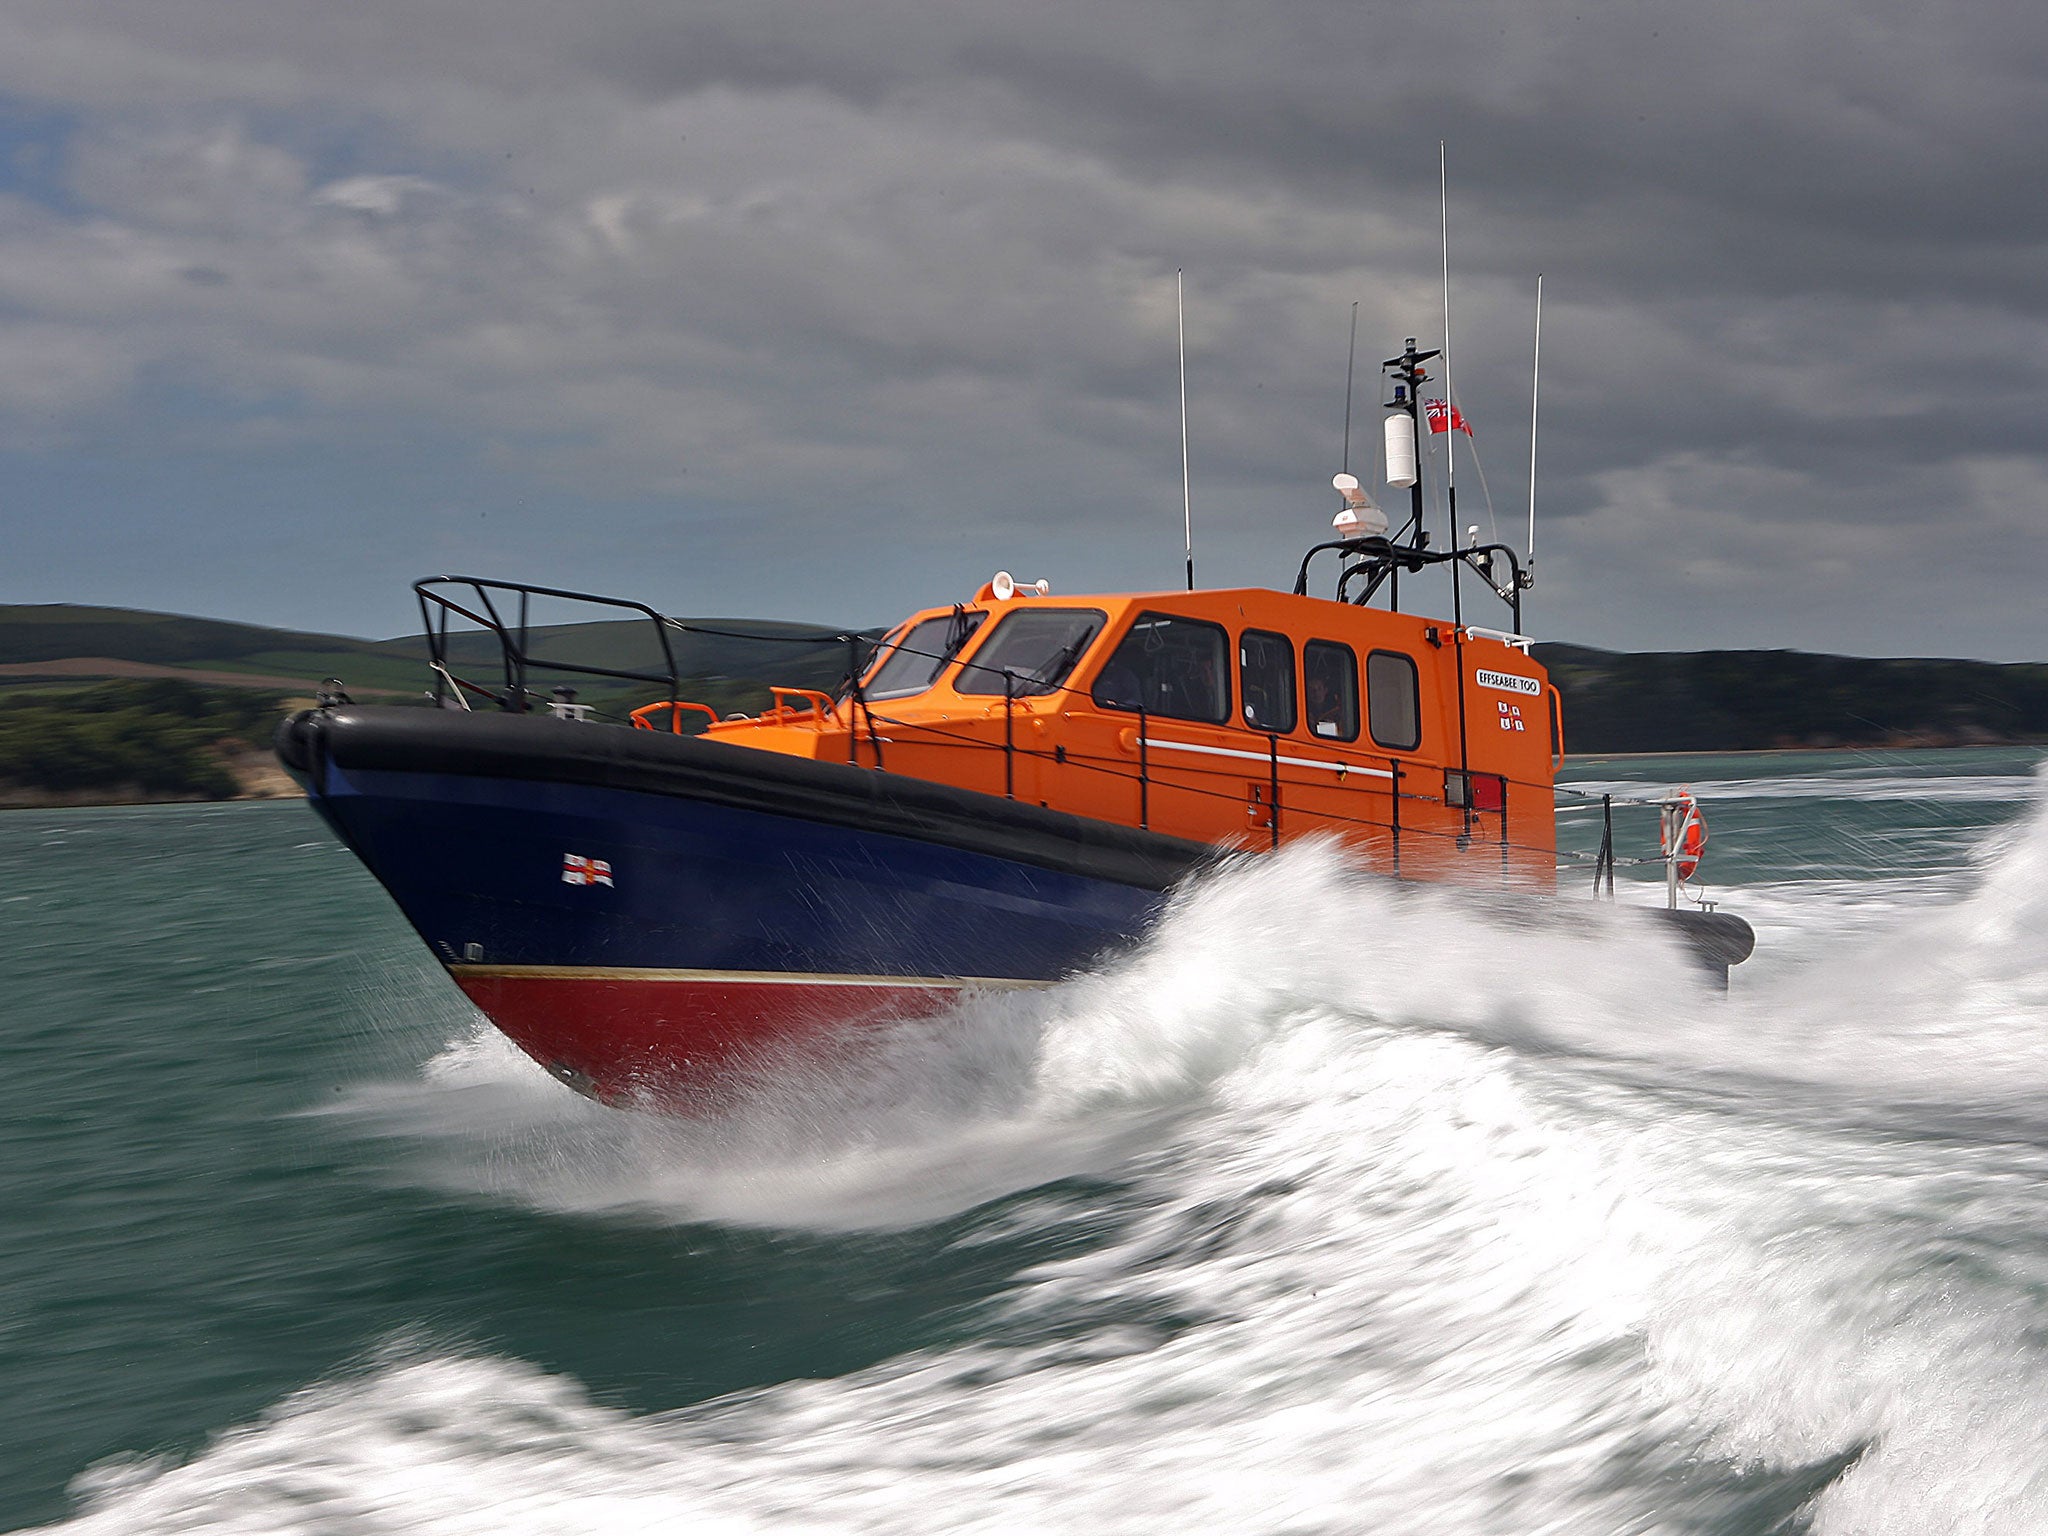 Lifeboat crews rescued one of the men pulled under the ferry